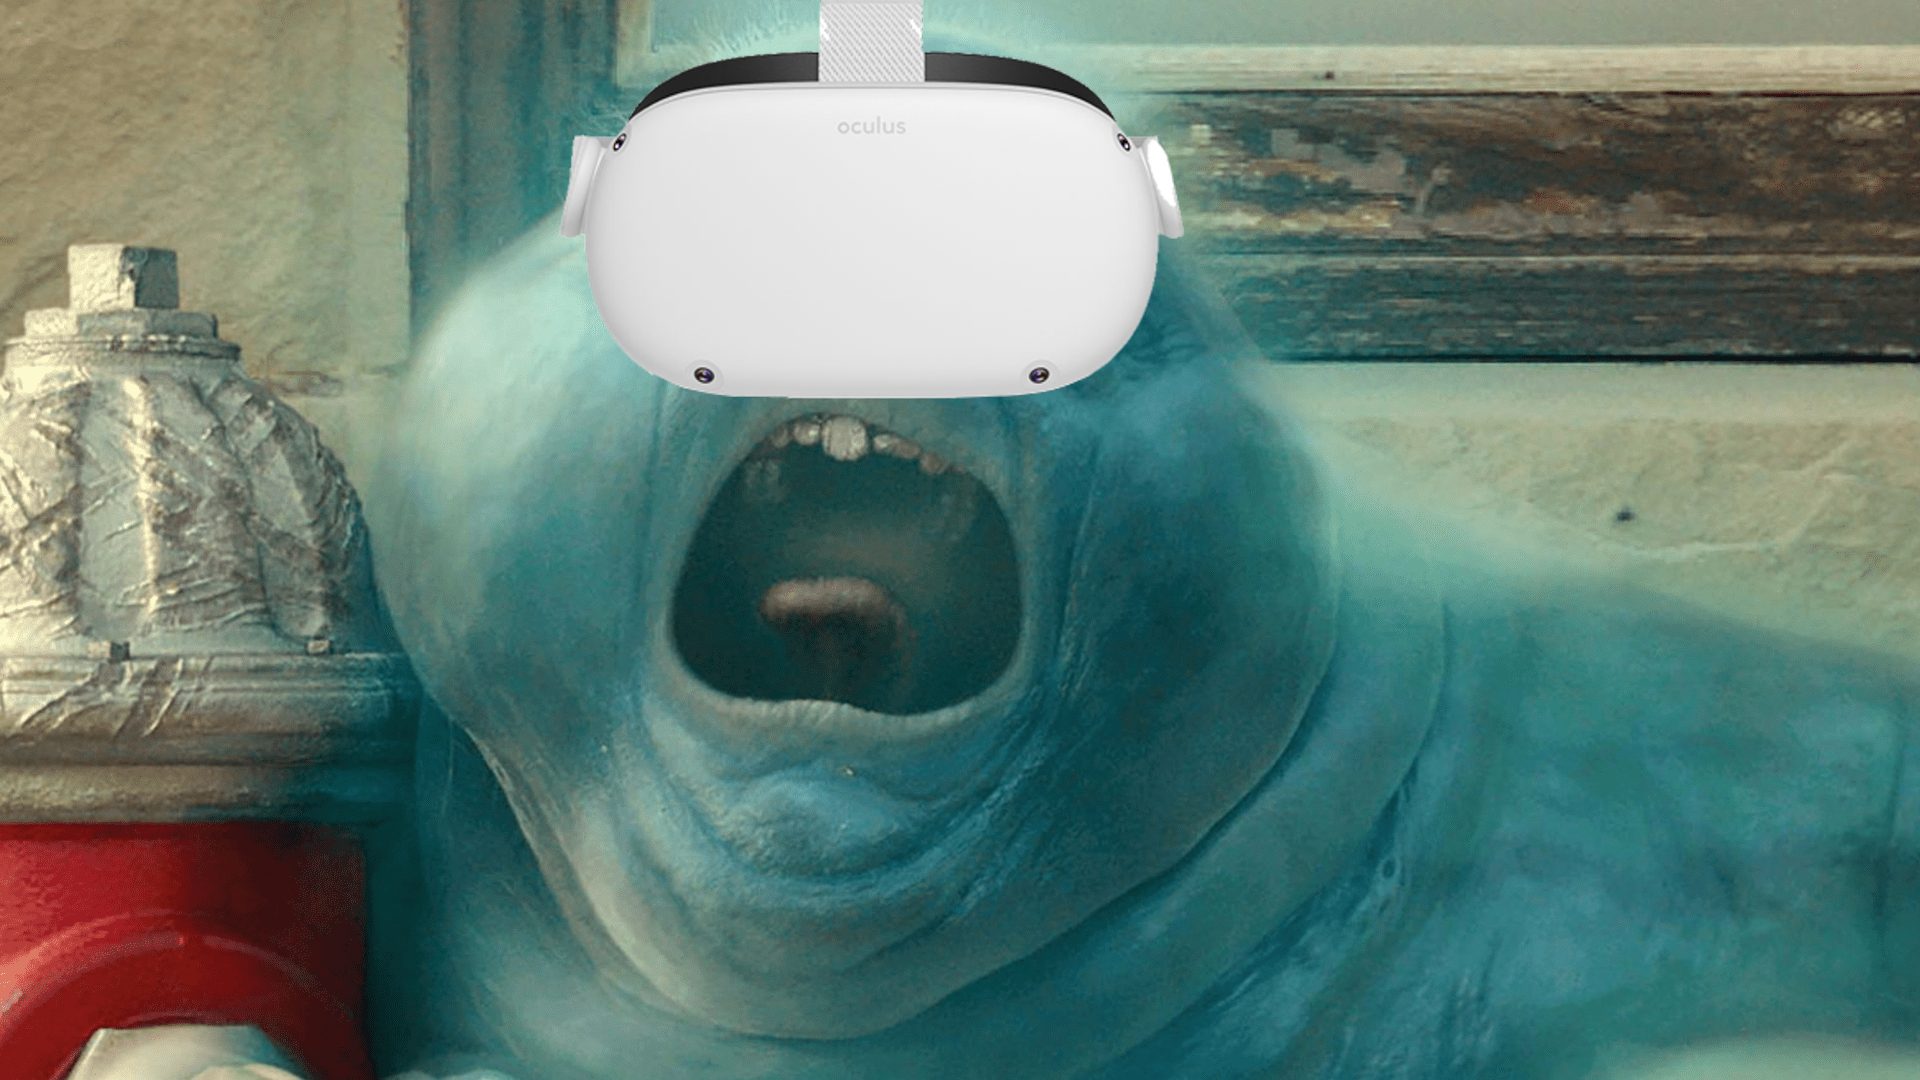 The Oculus Quest 2 is getting a new Ghostbusters game in 2023